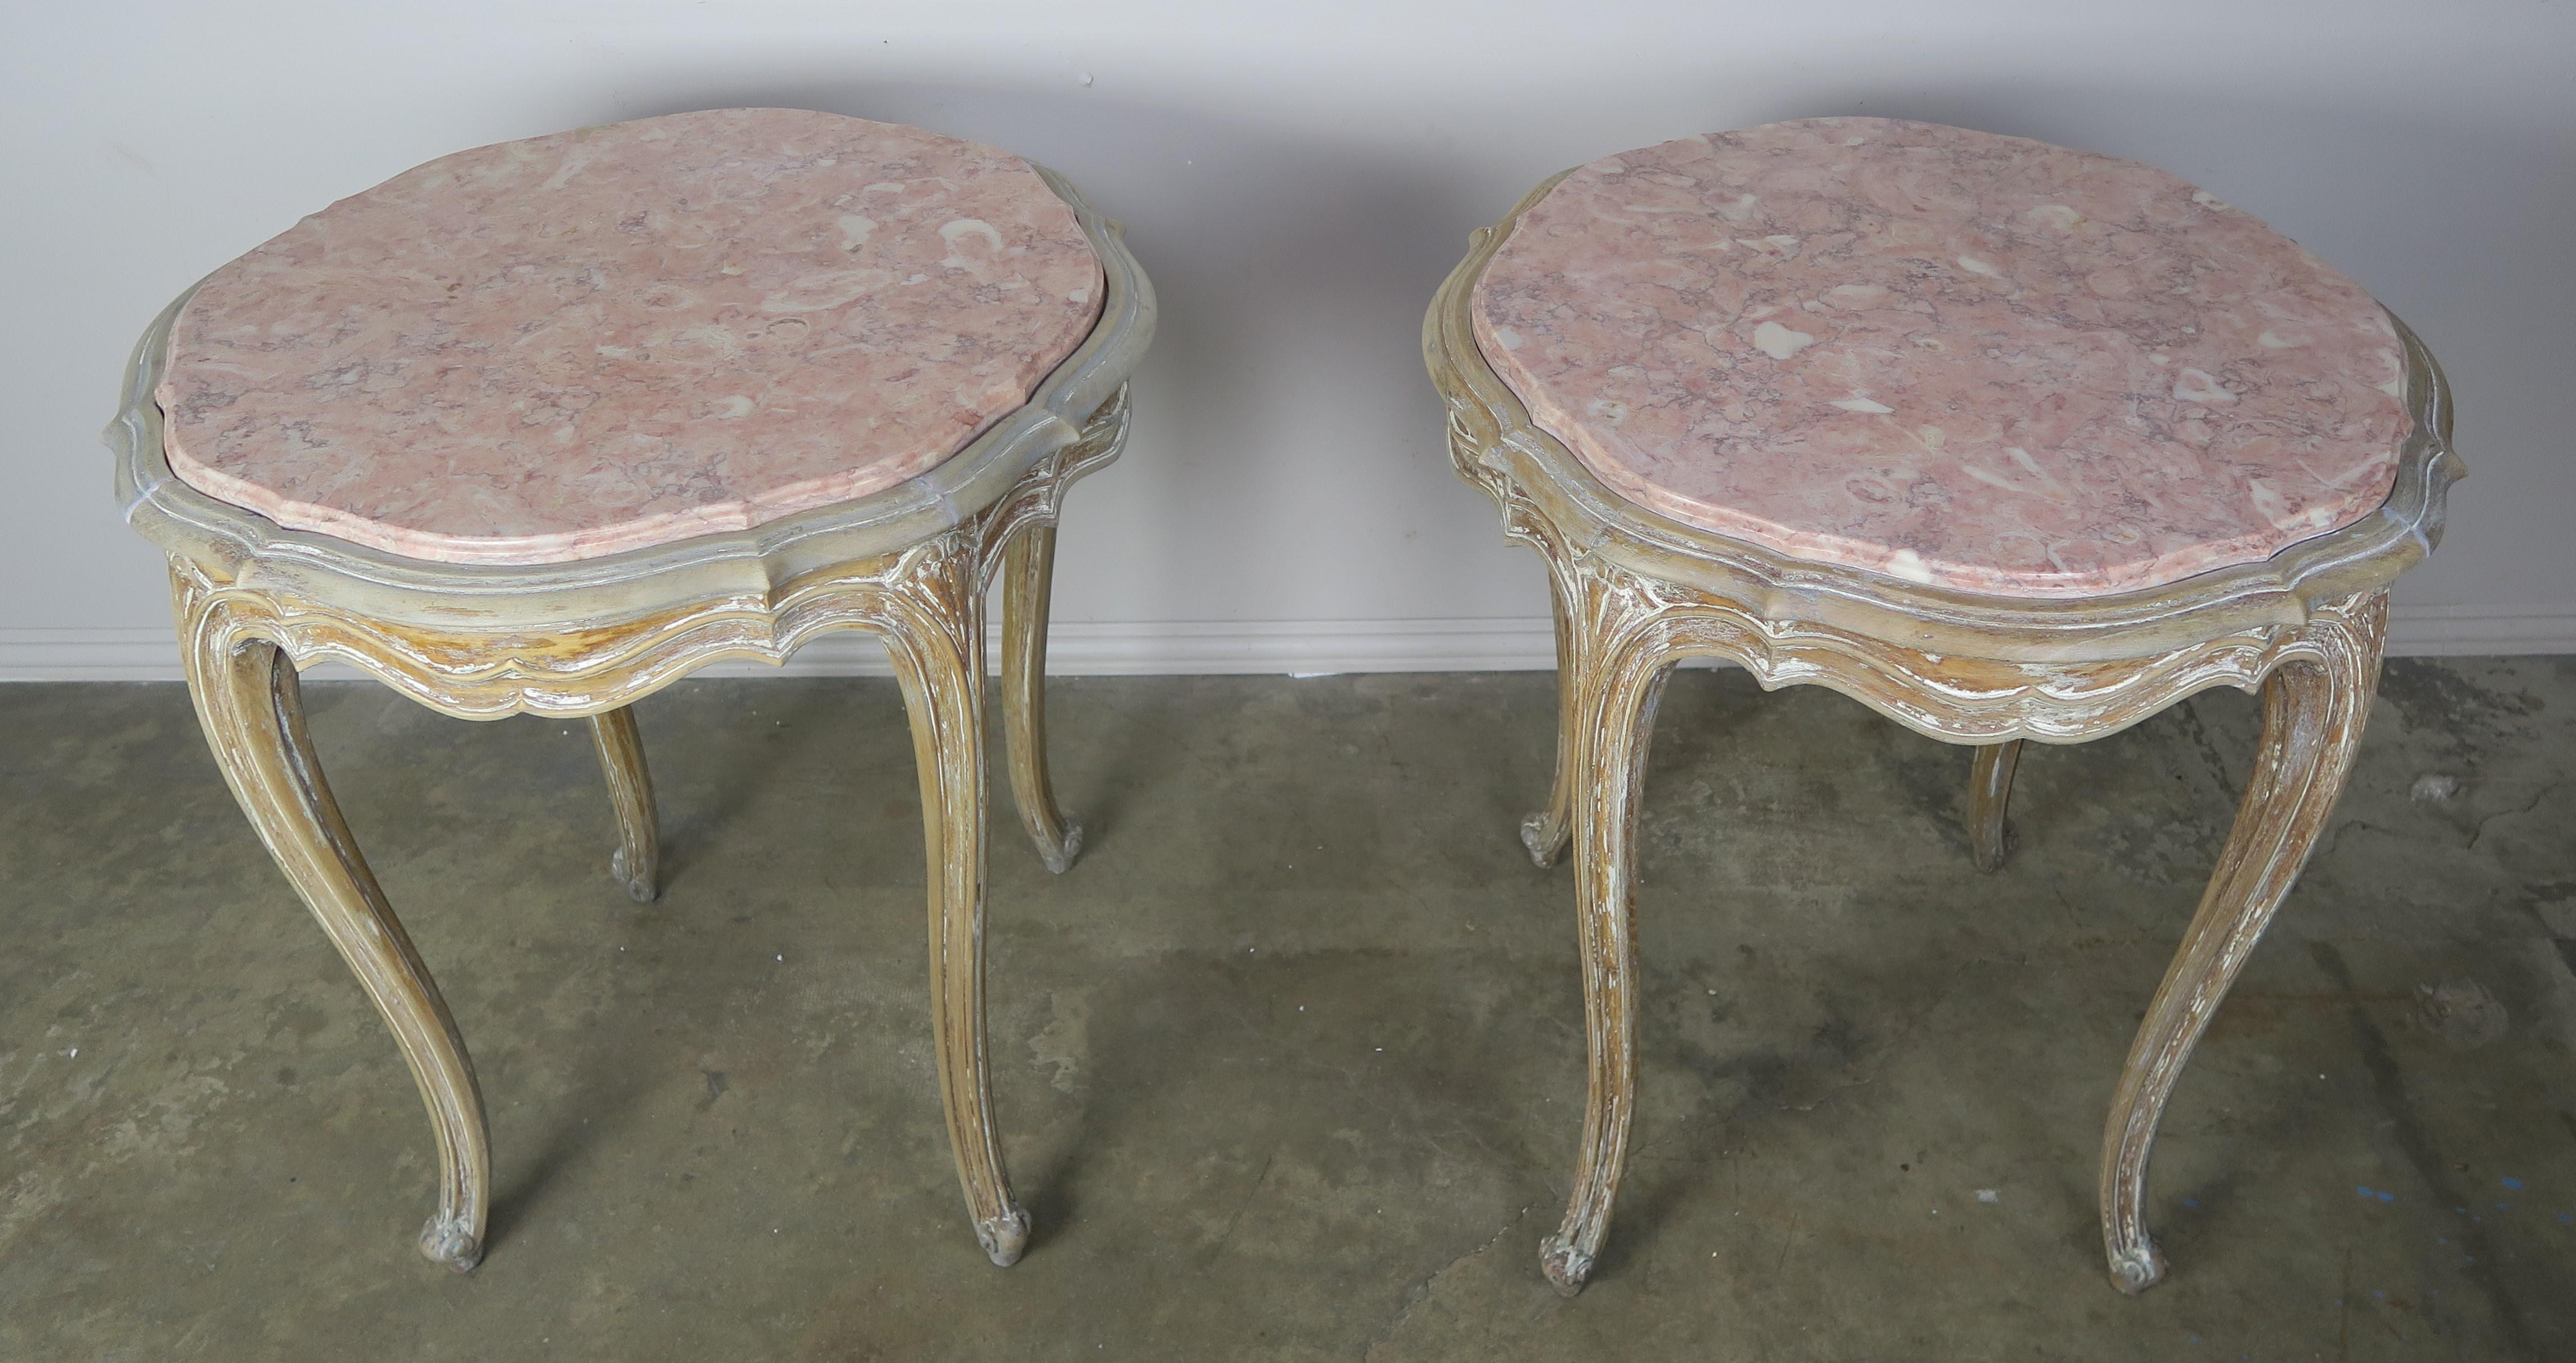 Pair of French painted marble top tables. Remnants beautiful worn paint can still be seen throughout the finish. The soft pink colored marble tops, rosa tea, is the perfect color to coordinate with the painted bases. The tables stand on four